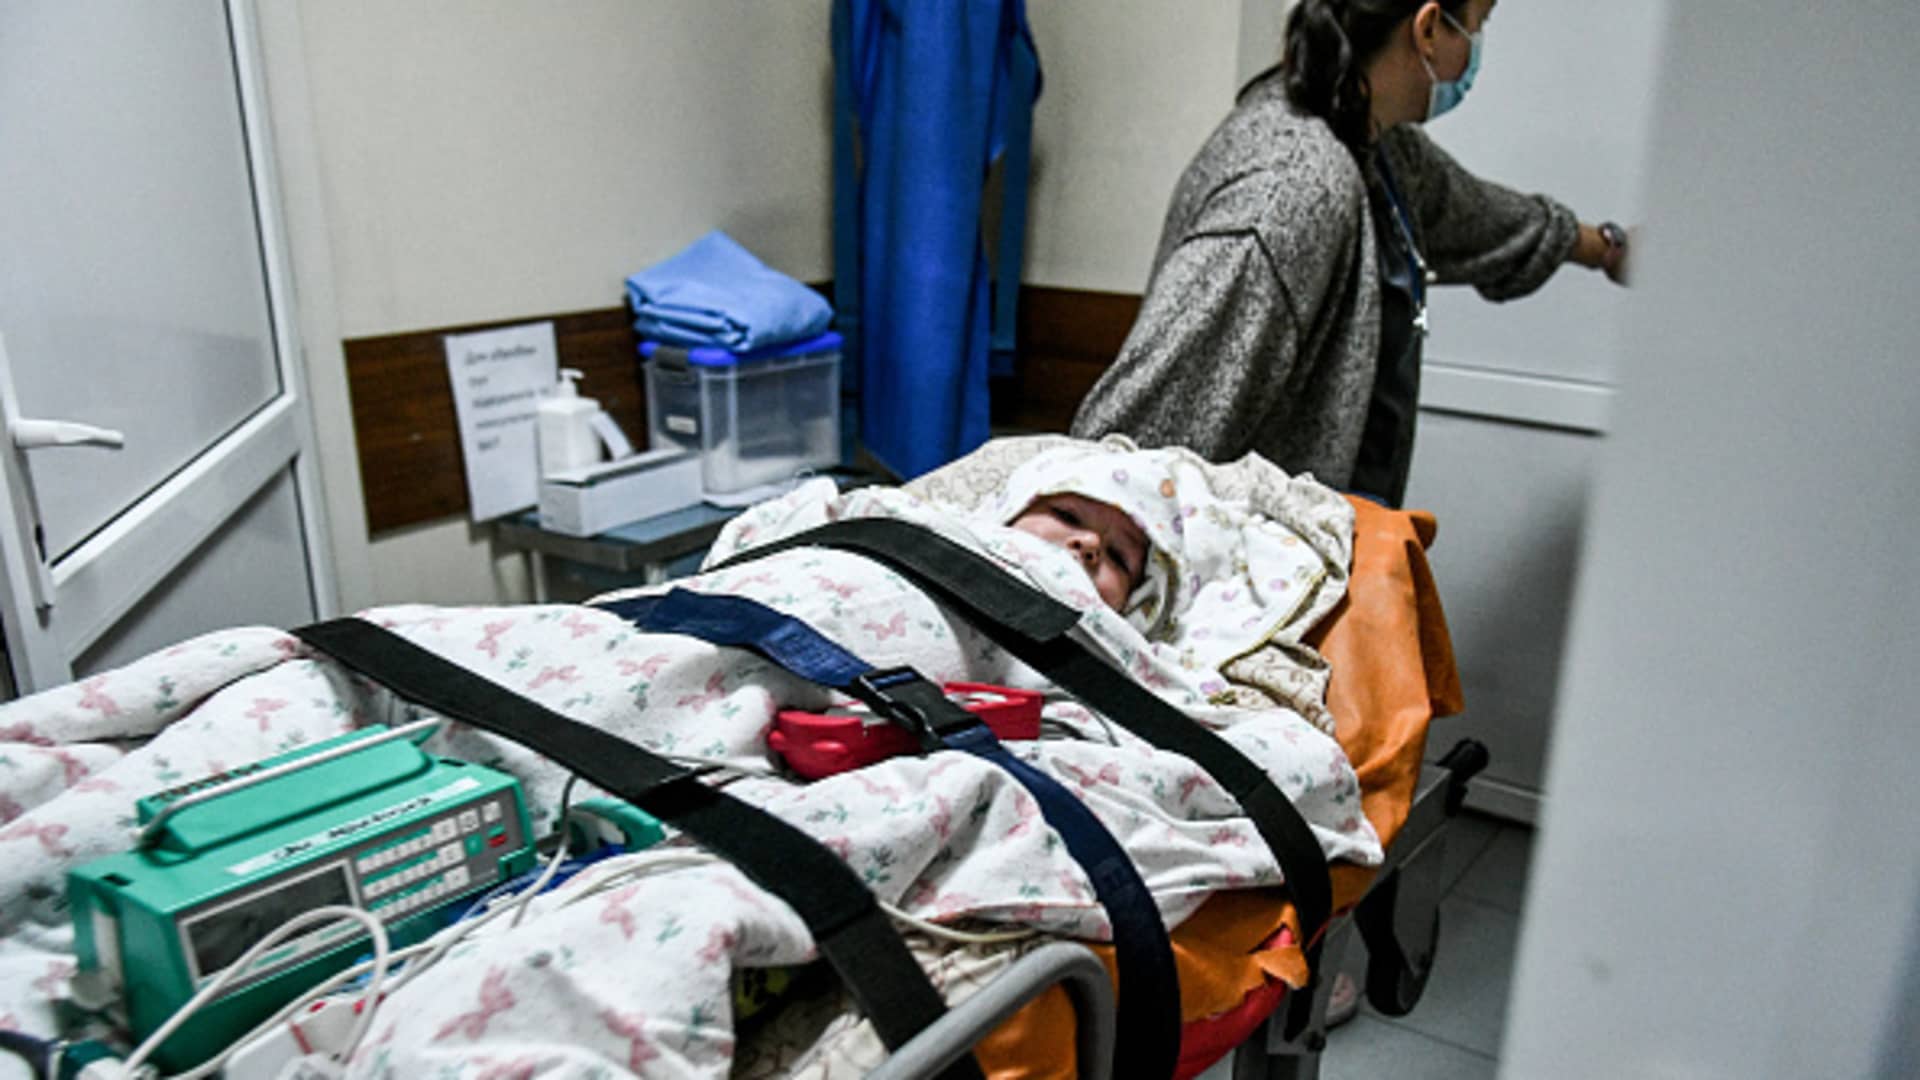 Injured civilians from Mariupol, receive treatment in Zaporizhzhia, Ukraine on March 18, 2022 as evacuations from Mariupol continue amid Russian attacks.